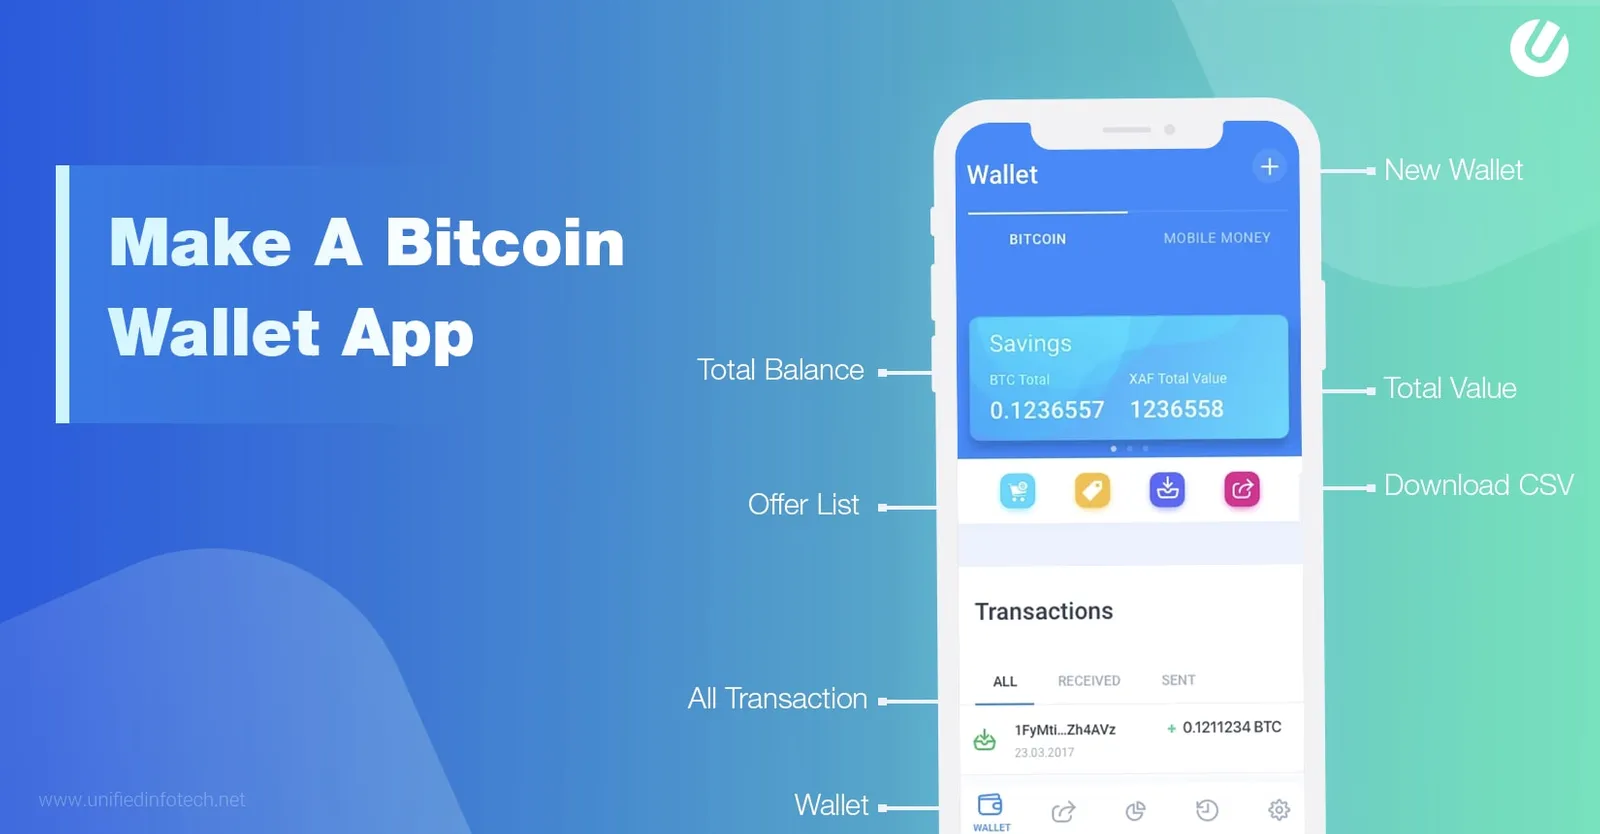 How much does it cost to build a Bitcoin Wallet App?